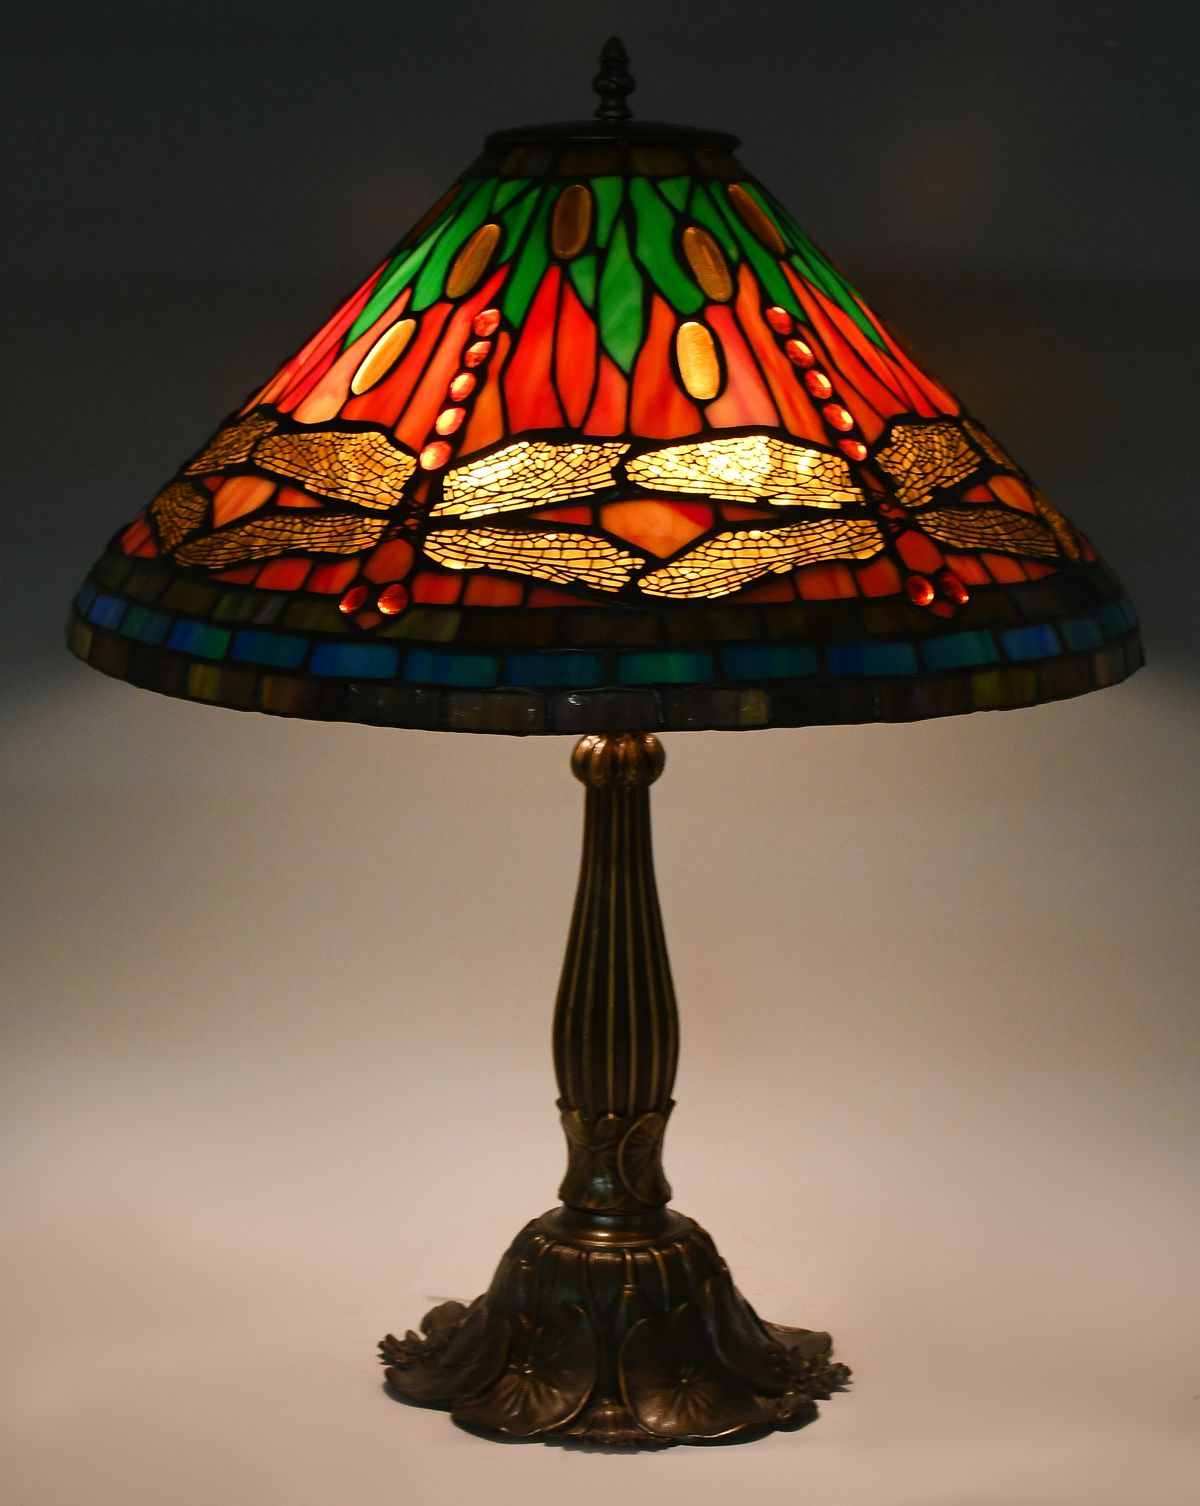 STAINED GLASS DRAGONFLY TABLE LAMP: